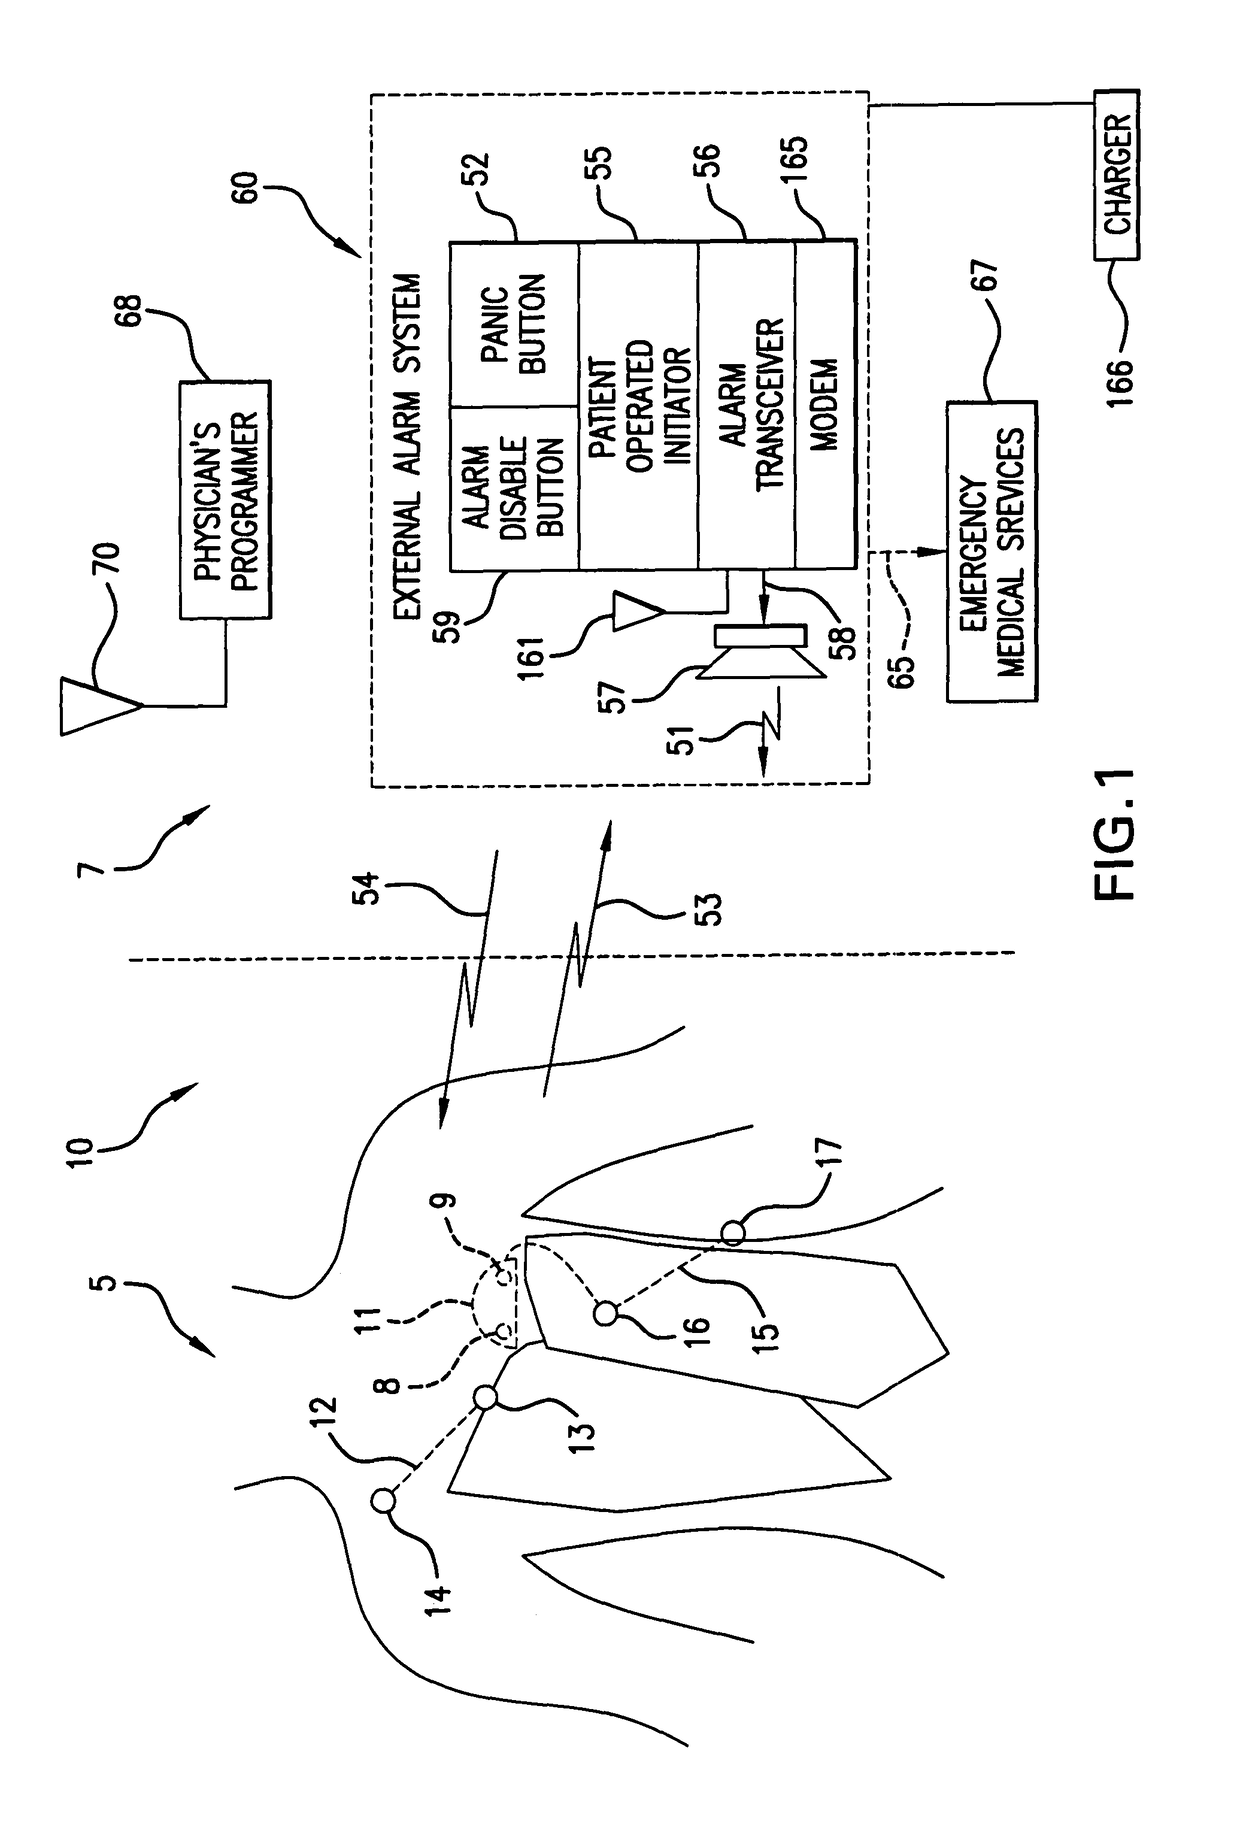 Waveform feature value averaging system and methods for the detection of cardiac events